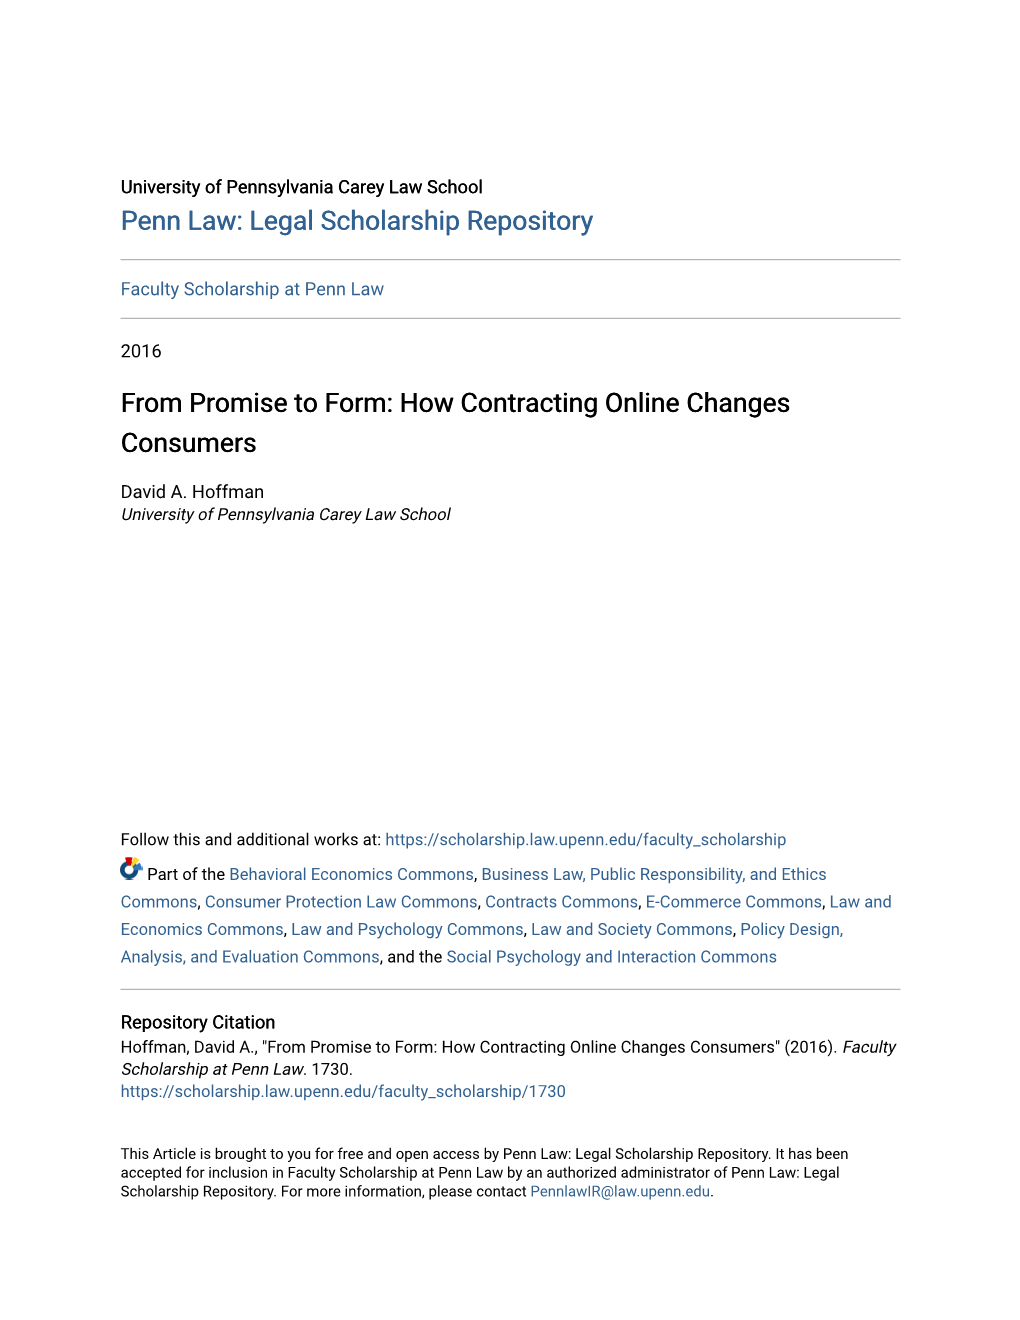 How Contracting Online Changes Consumers